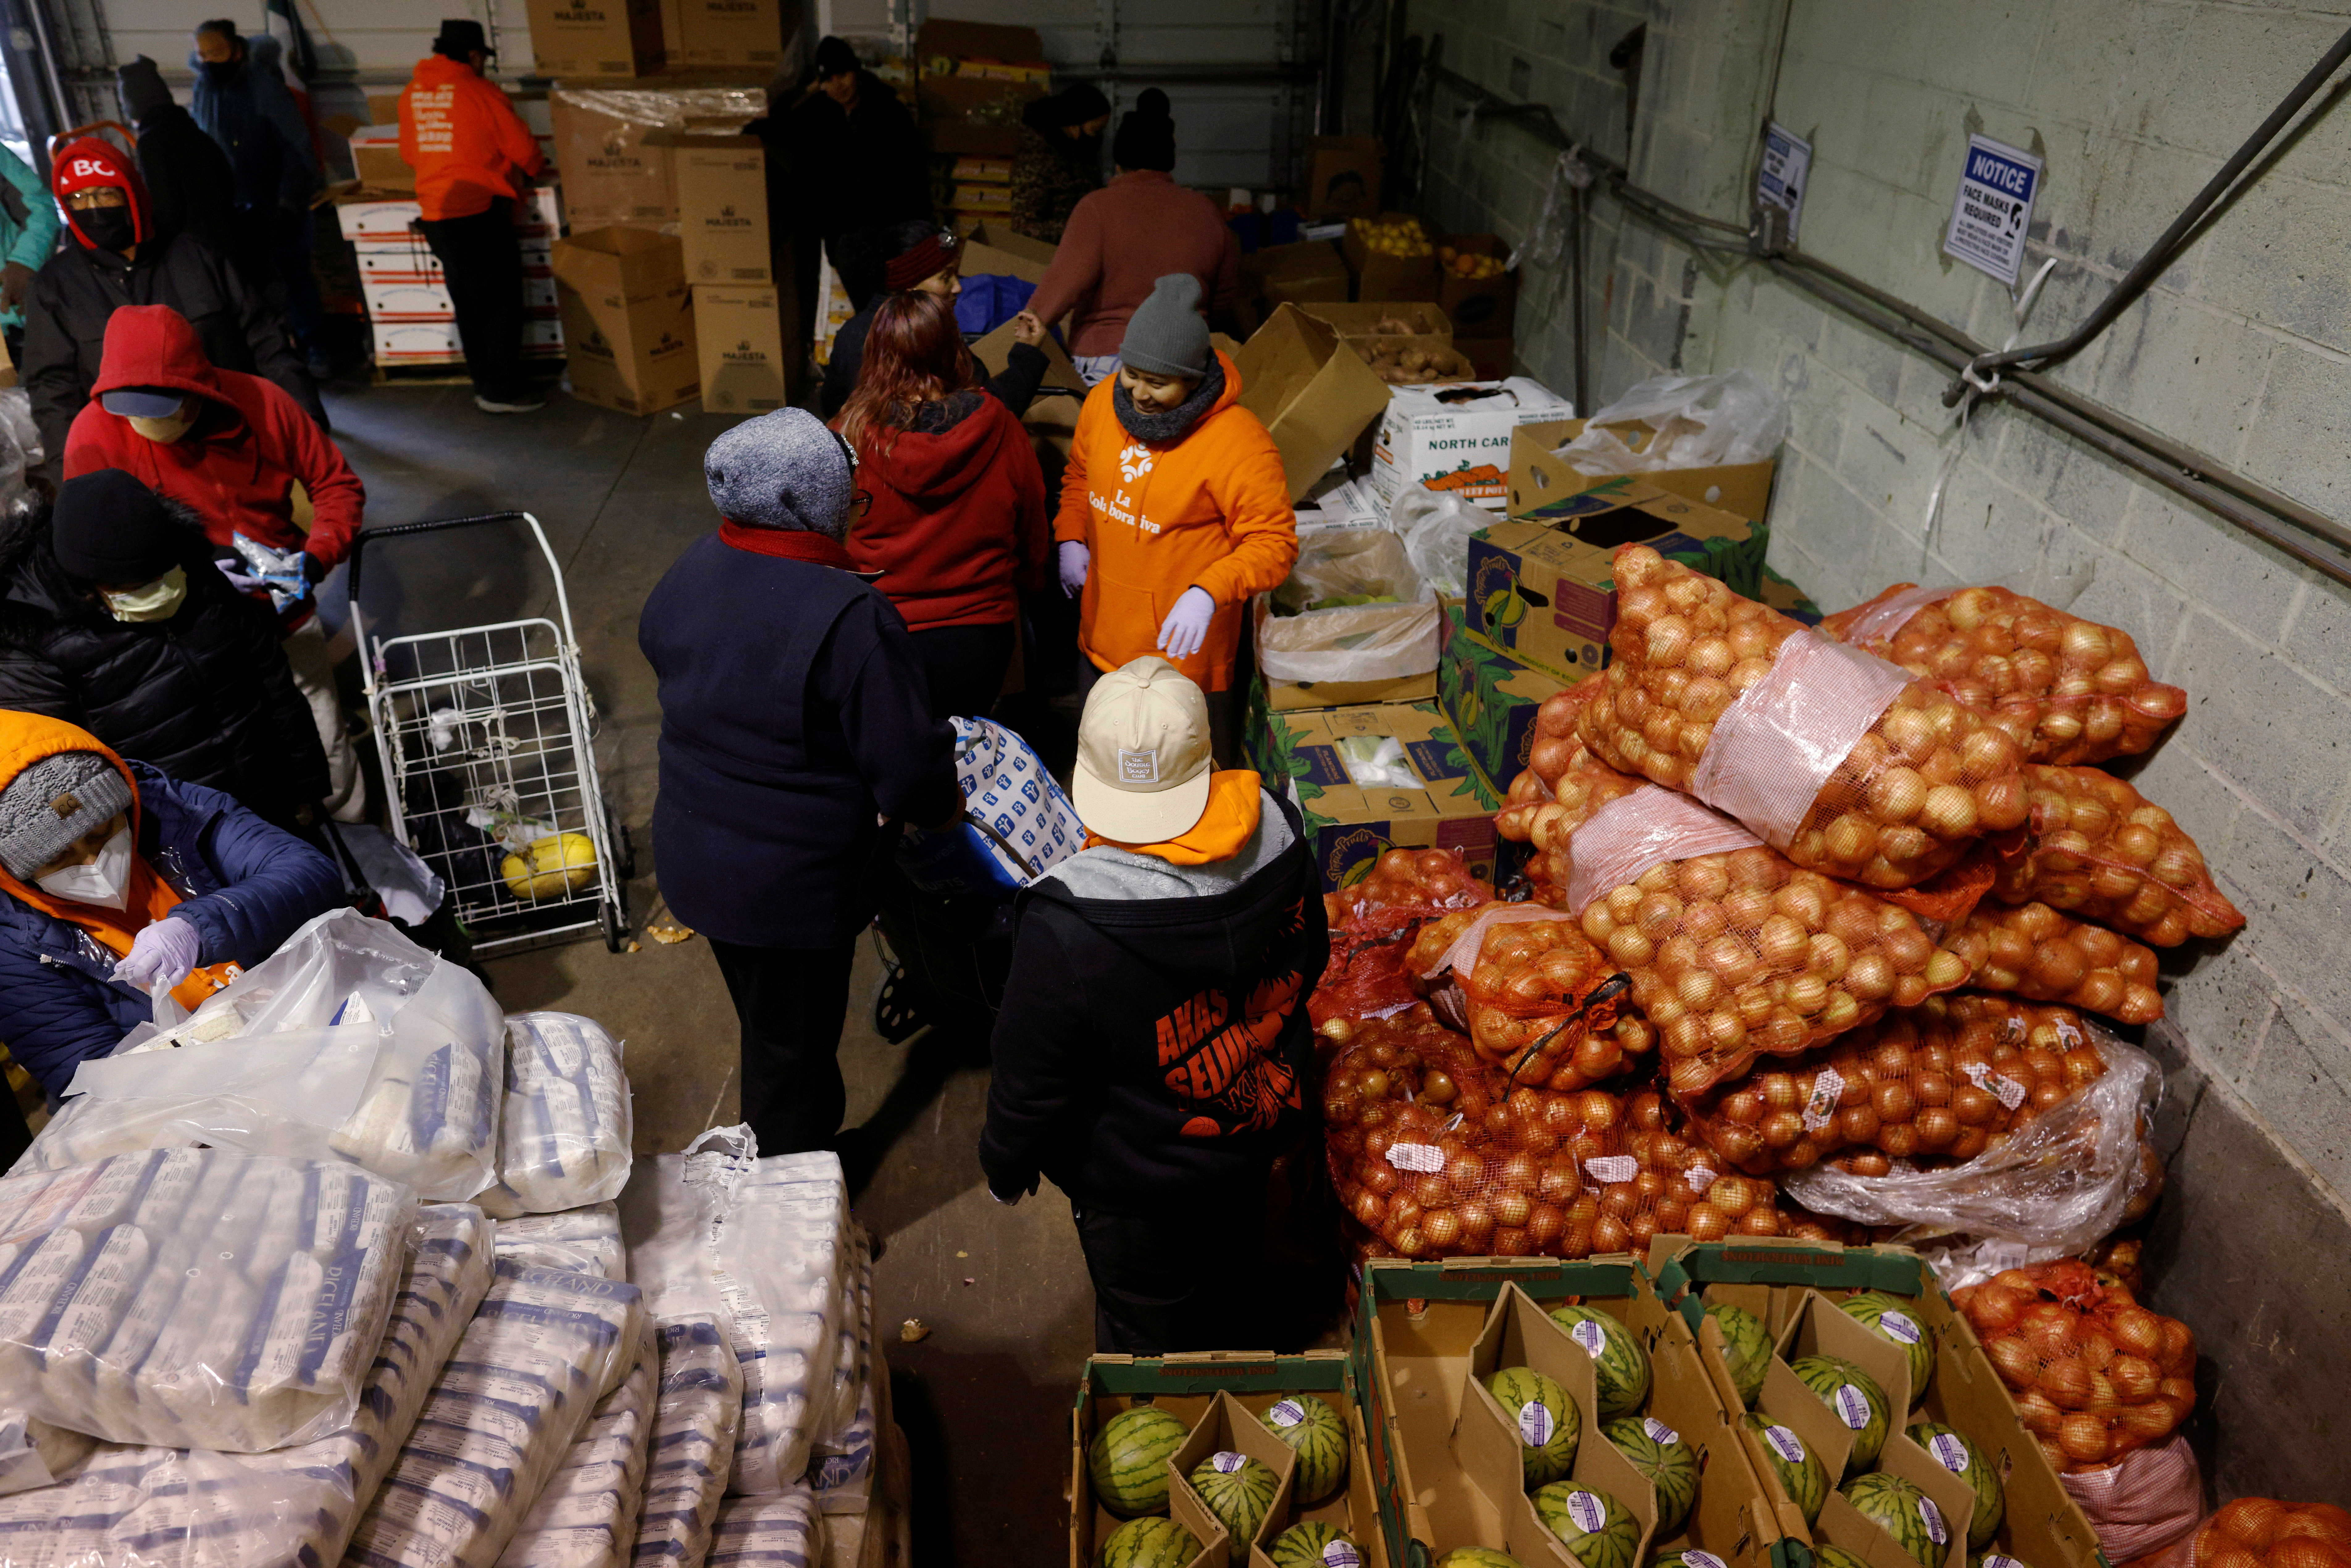 Residents receive free groceries at a food pantry in Chelsea, Massachusetts